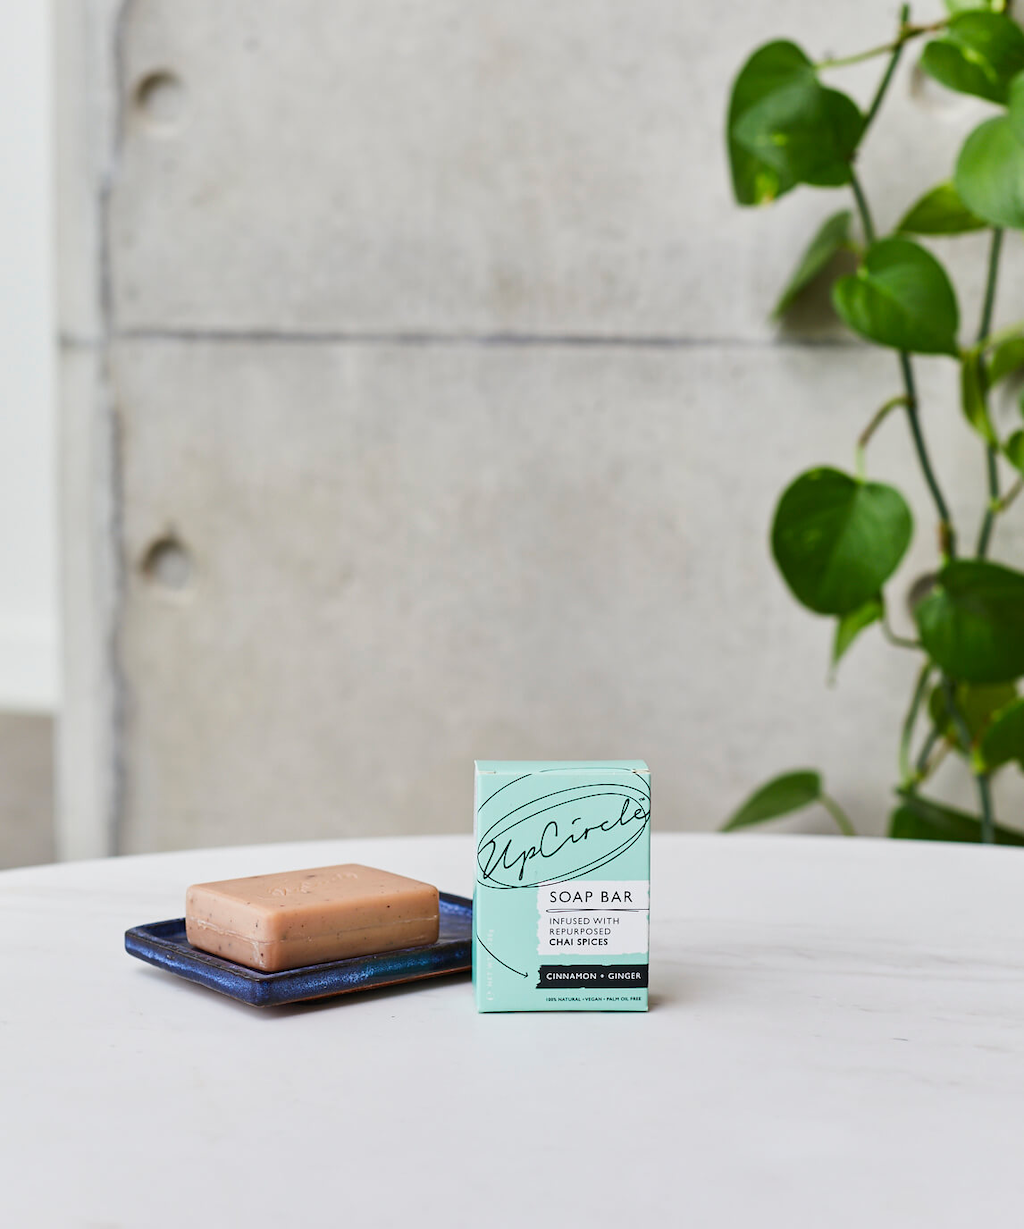 UpCircle Cleansing Soap Bar with Cinnamon and Ginger. Certified organic soap. The pink soap bar is sitting on a dark blue ceramic soap dish next to its green branded box on a white table with a concrete wall in the background.